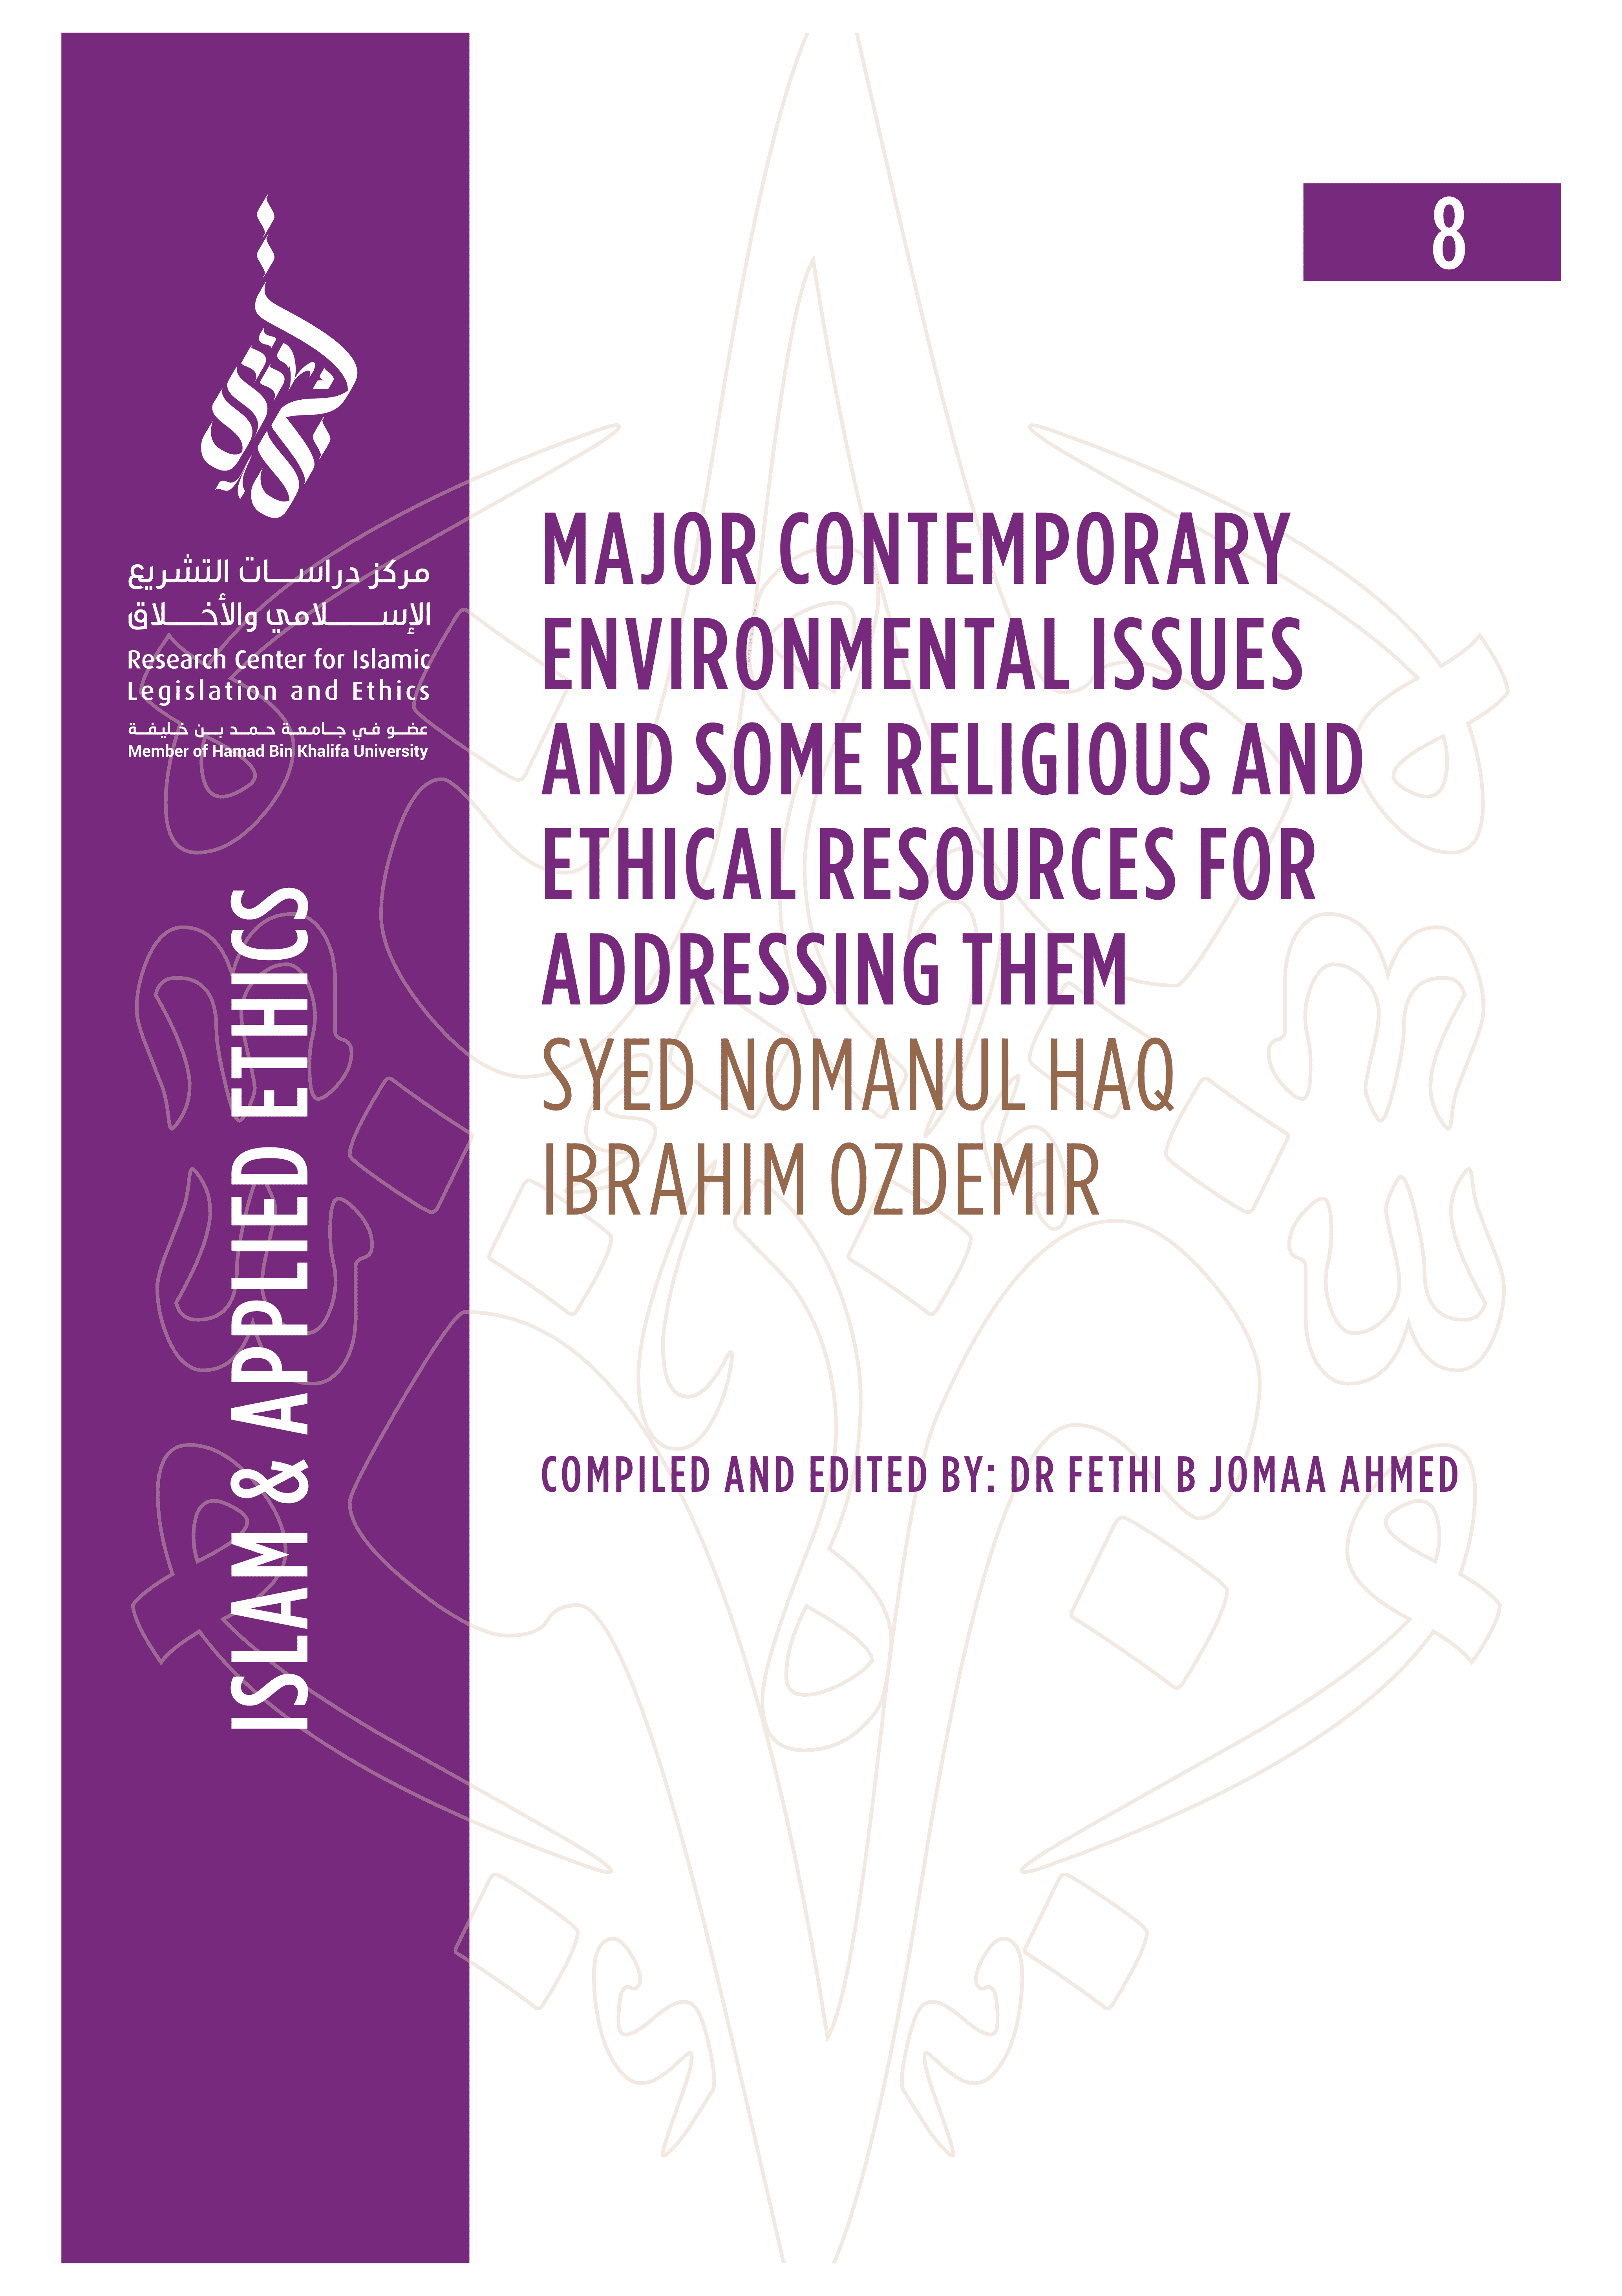 8/14 Major Contemporary Environmental Issues and Some Religious And Ethical Resources for Addressing Them